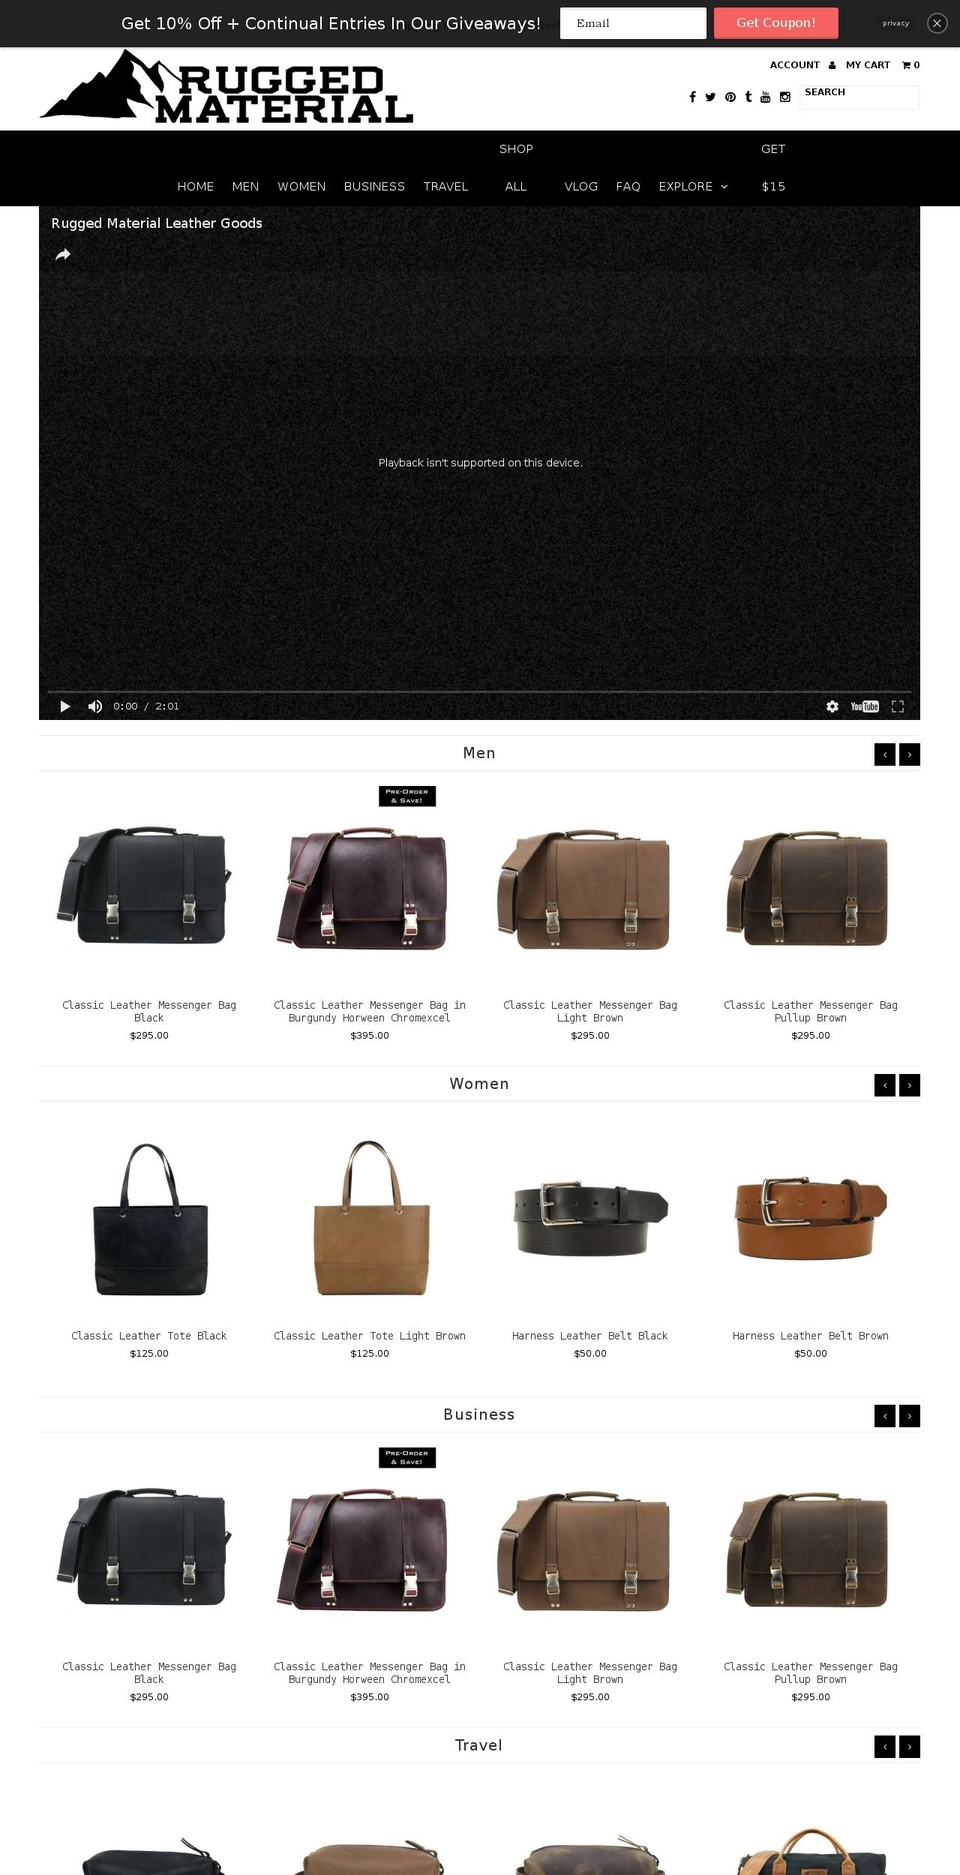 Venue Shopify theme site example rugged-material.myshopify.com